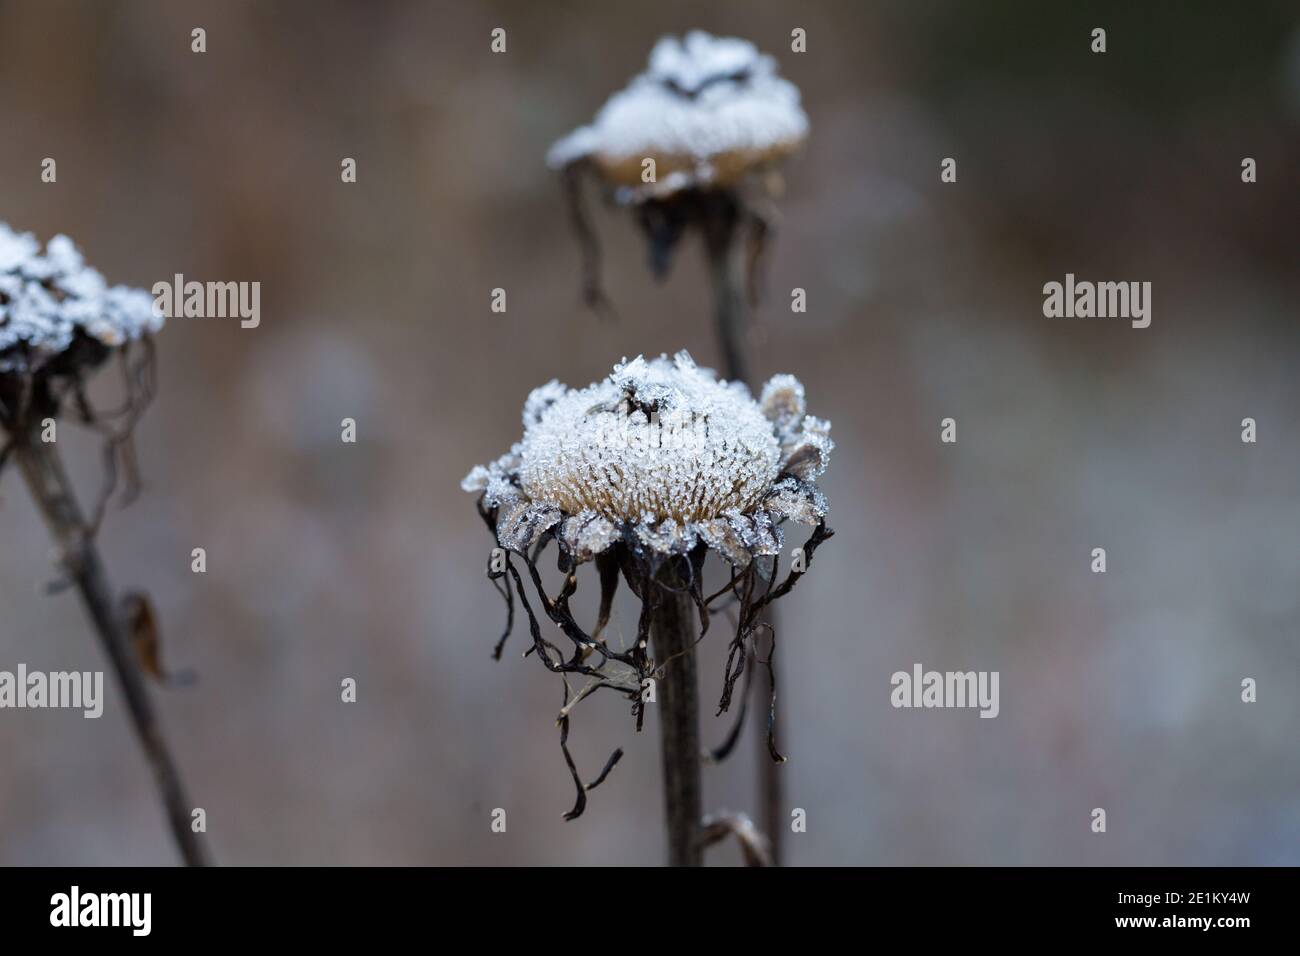 Close-up of dried flower covered with ice crystals. Symbol for cold weather and winter season. Stock Photo